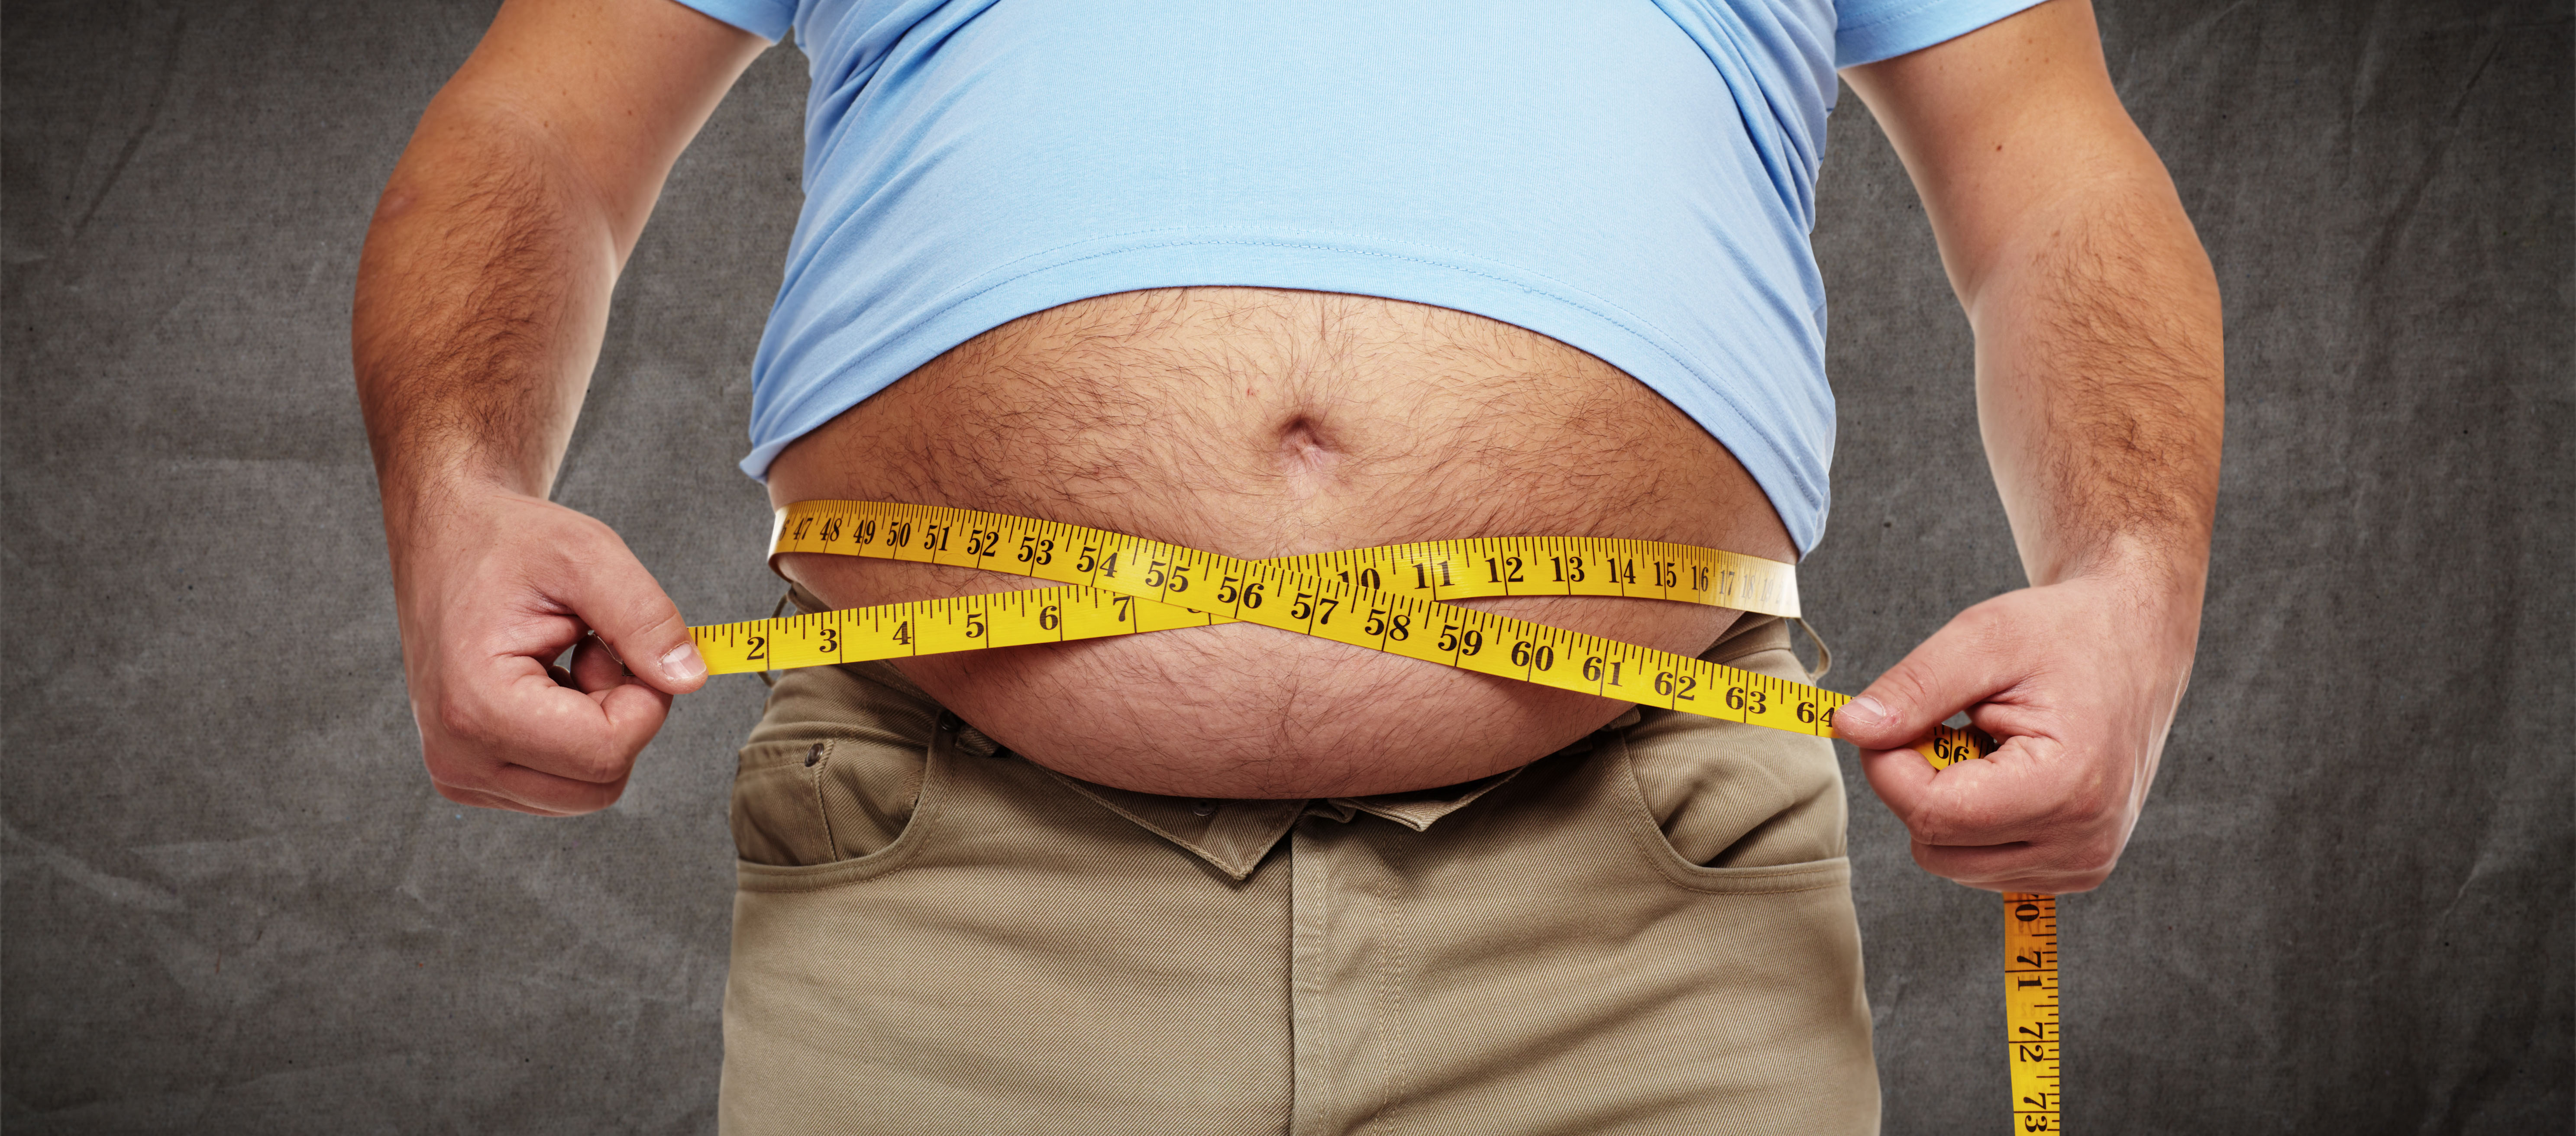 Surgery Reduces Health Risks In Overweight Diabetes Patients Scot Healthcare